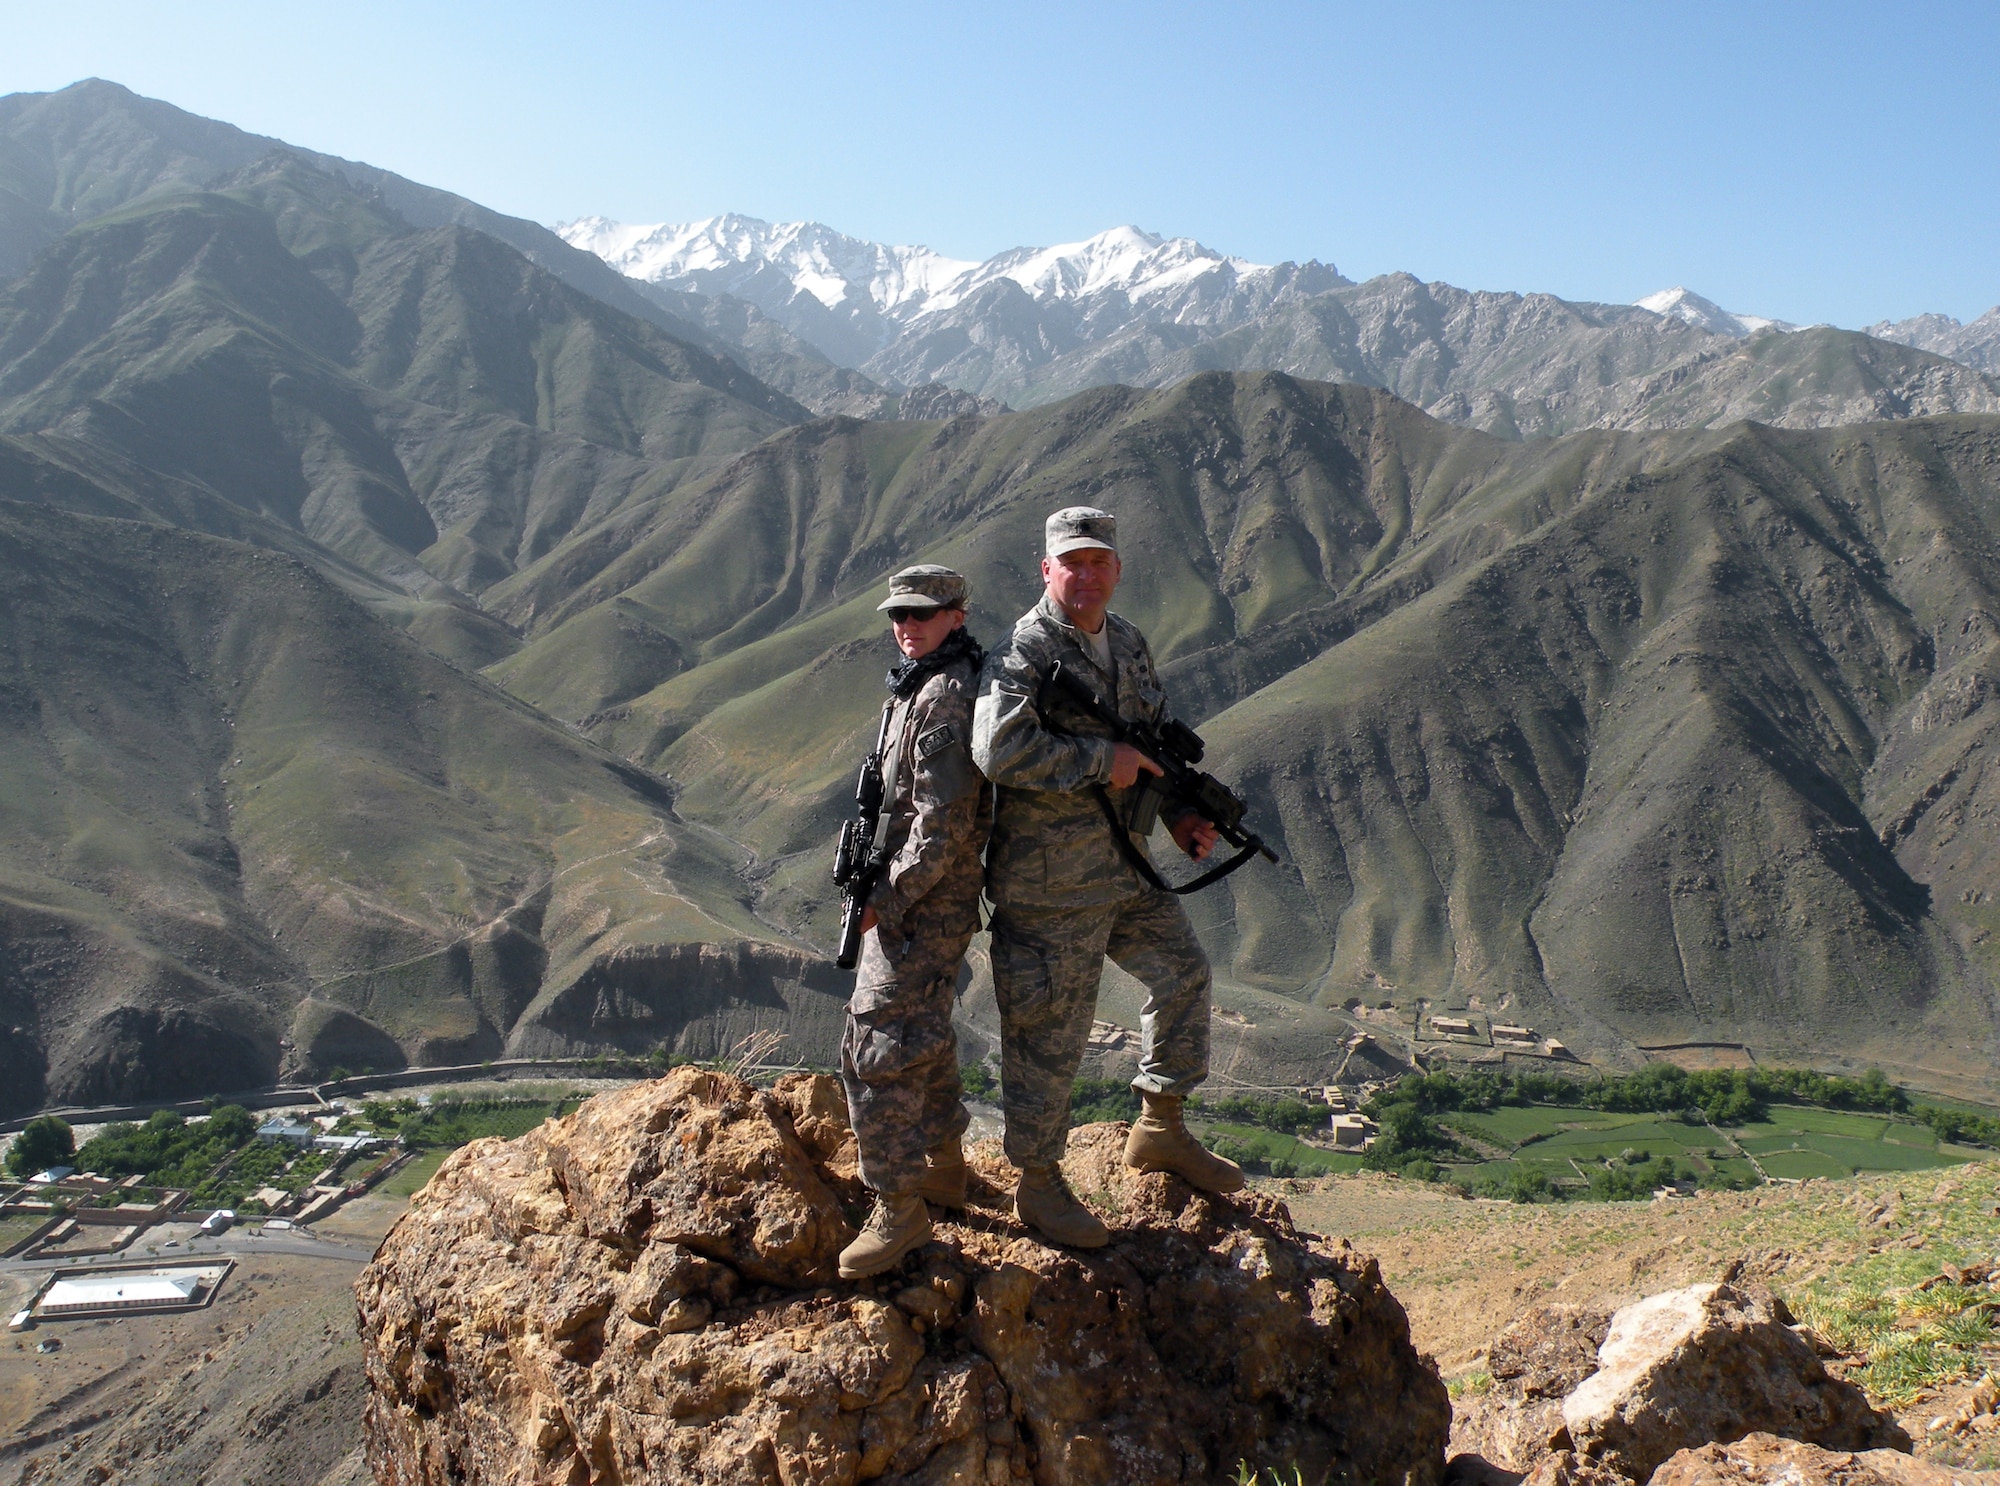 Senior Airman Ashton Goodman and Lt. Col. Mark E. Stratton atop "Lion Hill" behind their Forward Operating Base in Afghanistan May 24, 2009. Colonel Stratton served as the Panjshir Provincial Reconstruction Team's commander while Airman Goodman spent the majority of her deployment as the Panjshir PRT's primary tactical driver and usually served as the commander's driver. Both Airmen lost their lives May 26 from wounds sustained from an improvised explosive device.  (U.S. Air Force photo by Capt. Stacie N. Shafran)
                         